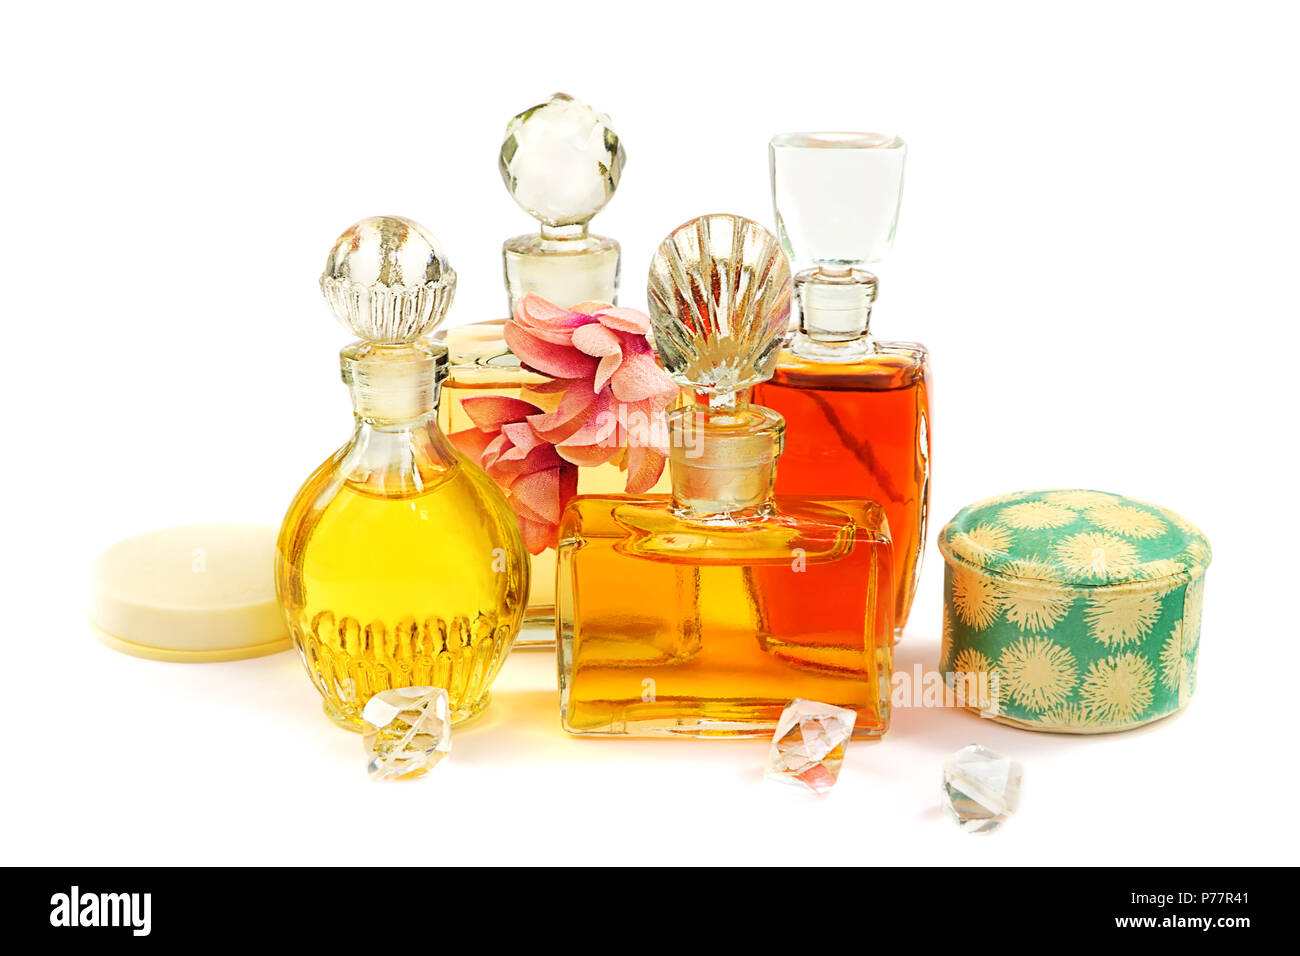 759 Fancy Perfume Bottle Images, Stock Photos, 3D objects